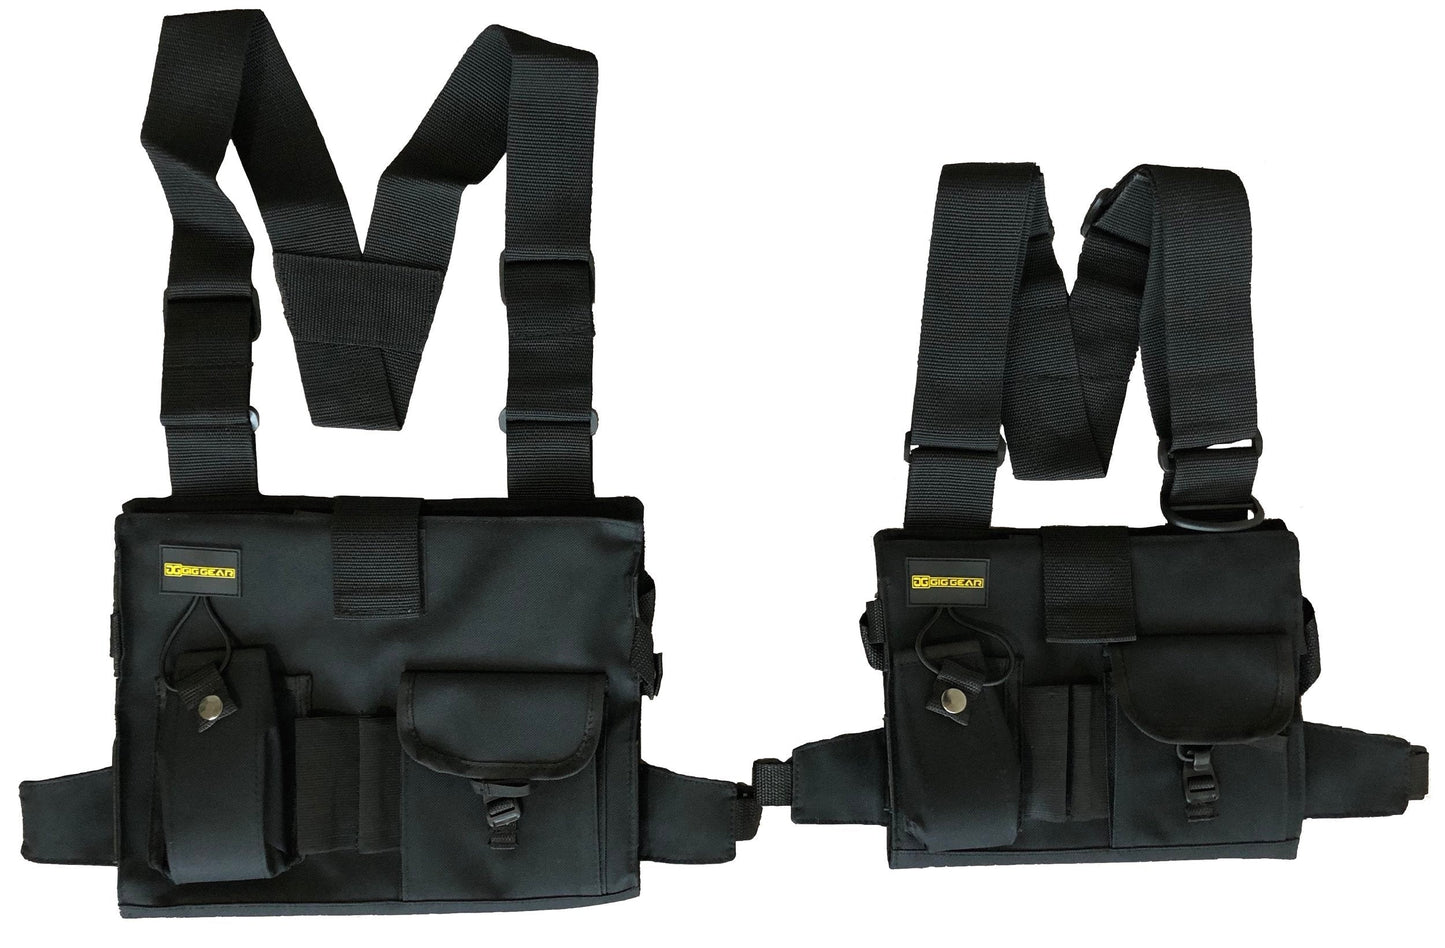 Chest Rig for Ipad and Tablet